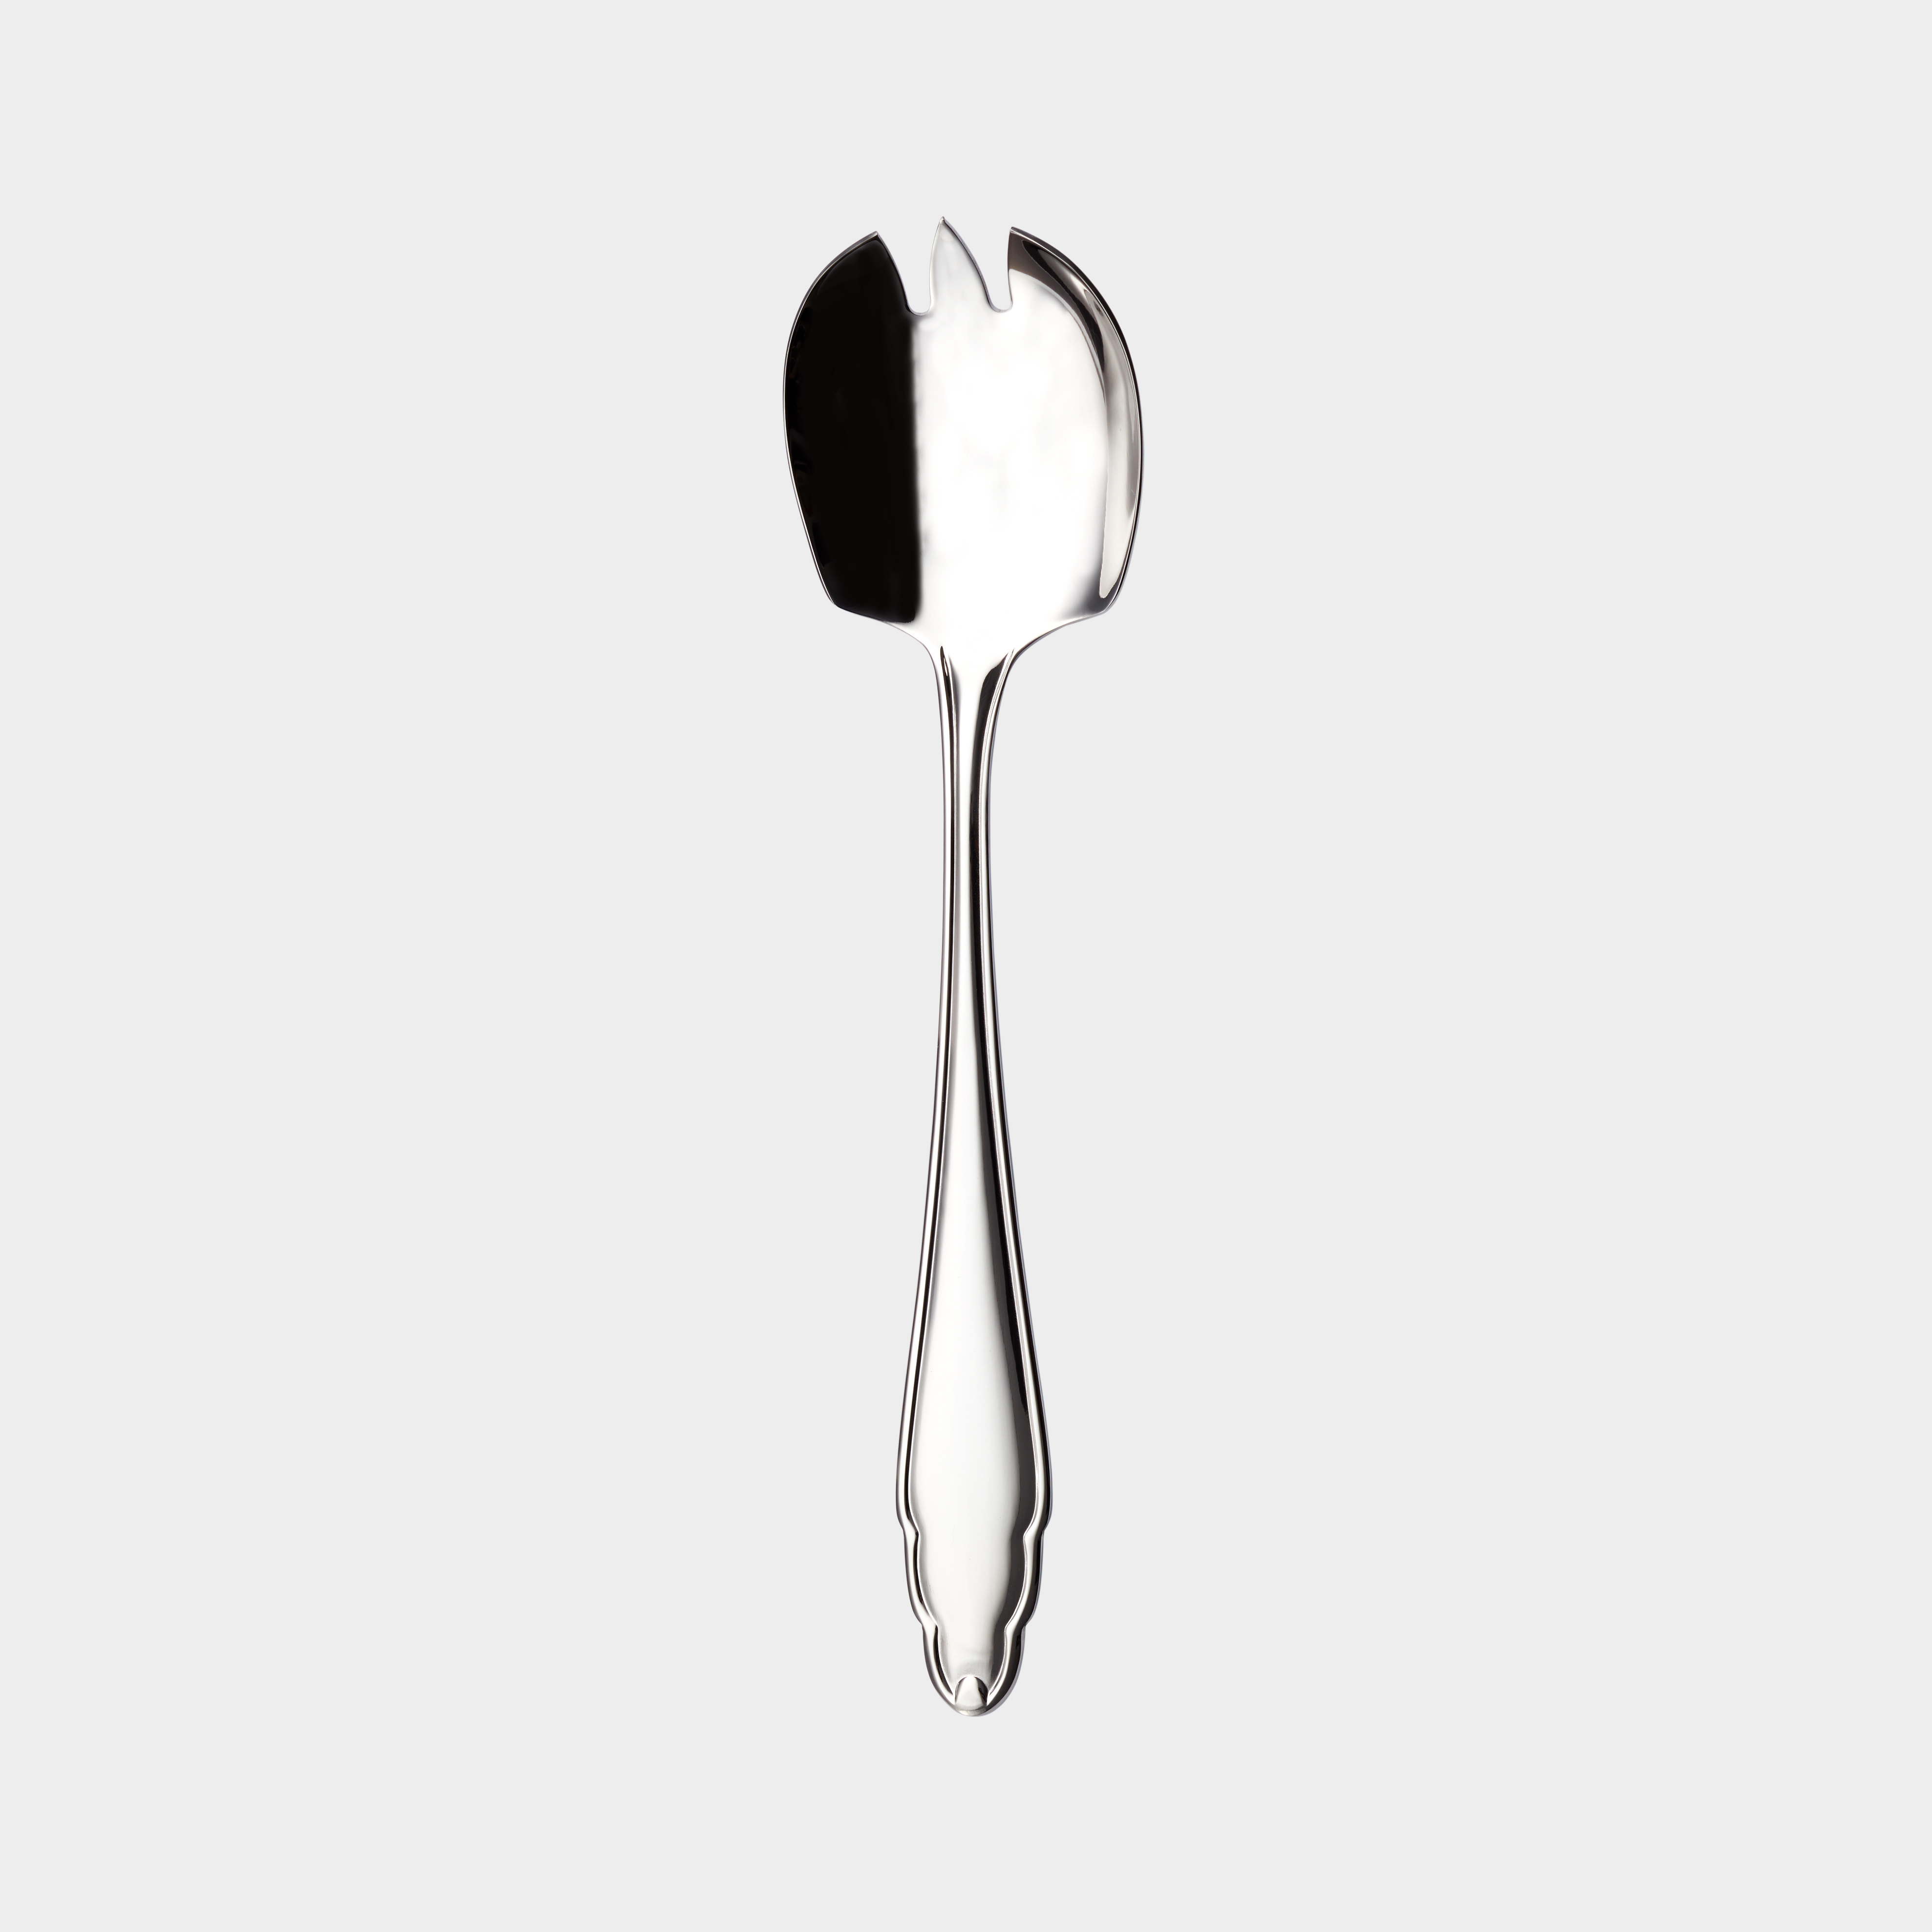 Lunch salad fork product image